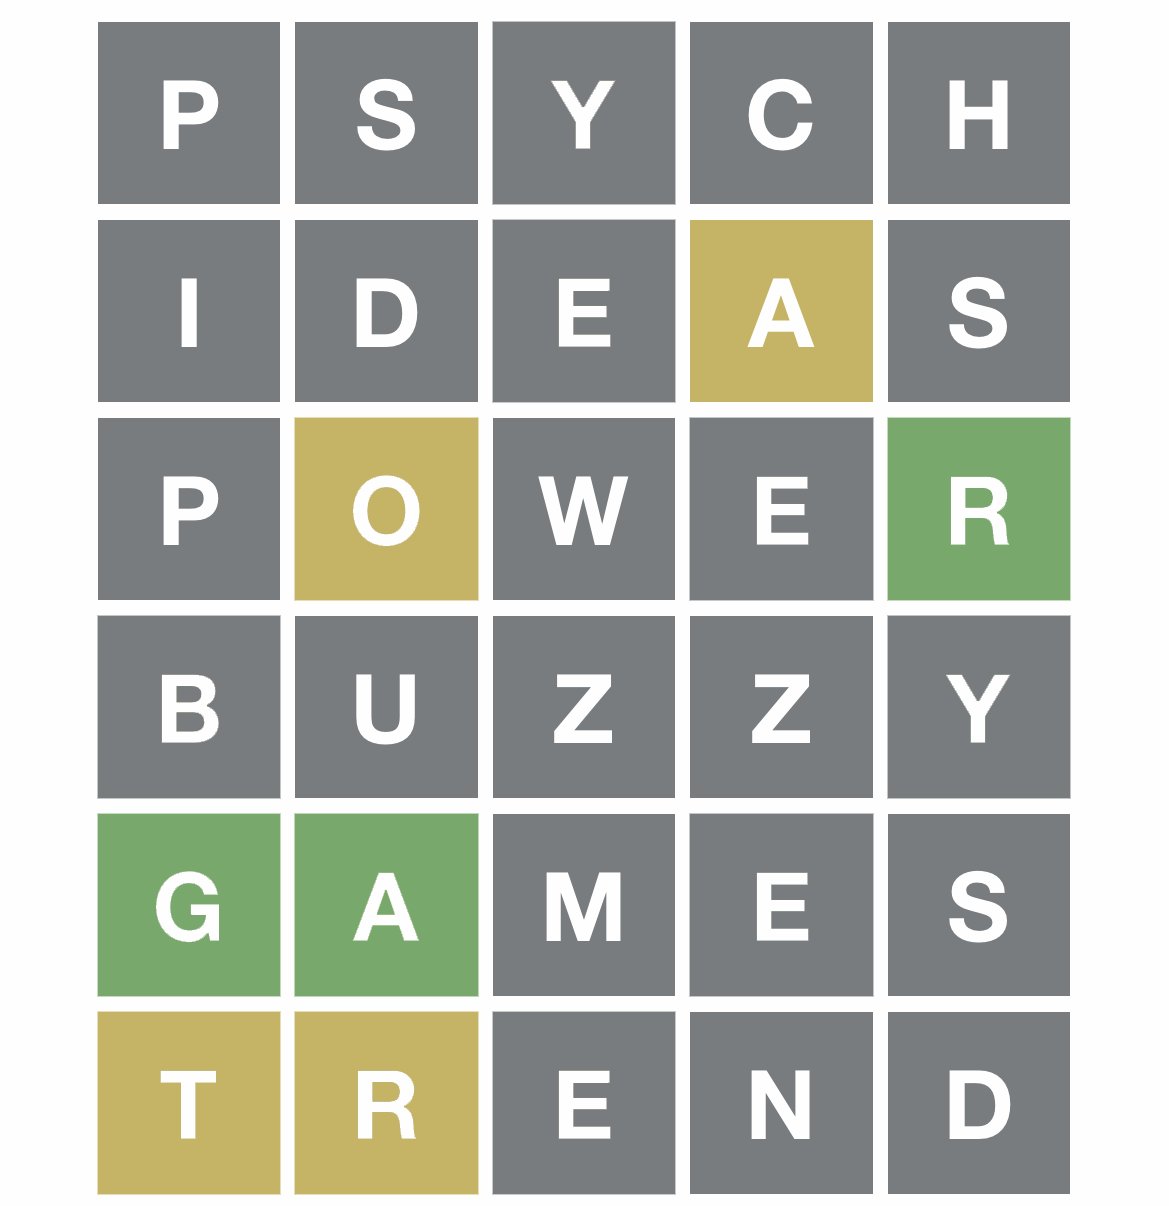 Social psychologist Matt Baldwin wakes up thinking about the yellow and green boxes of Wordle, the free, once-a-day word game that has gained millions